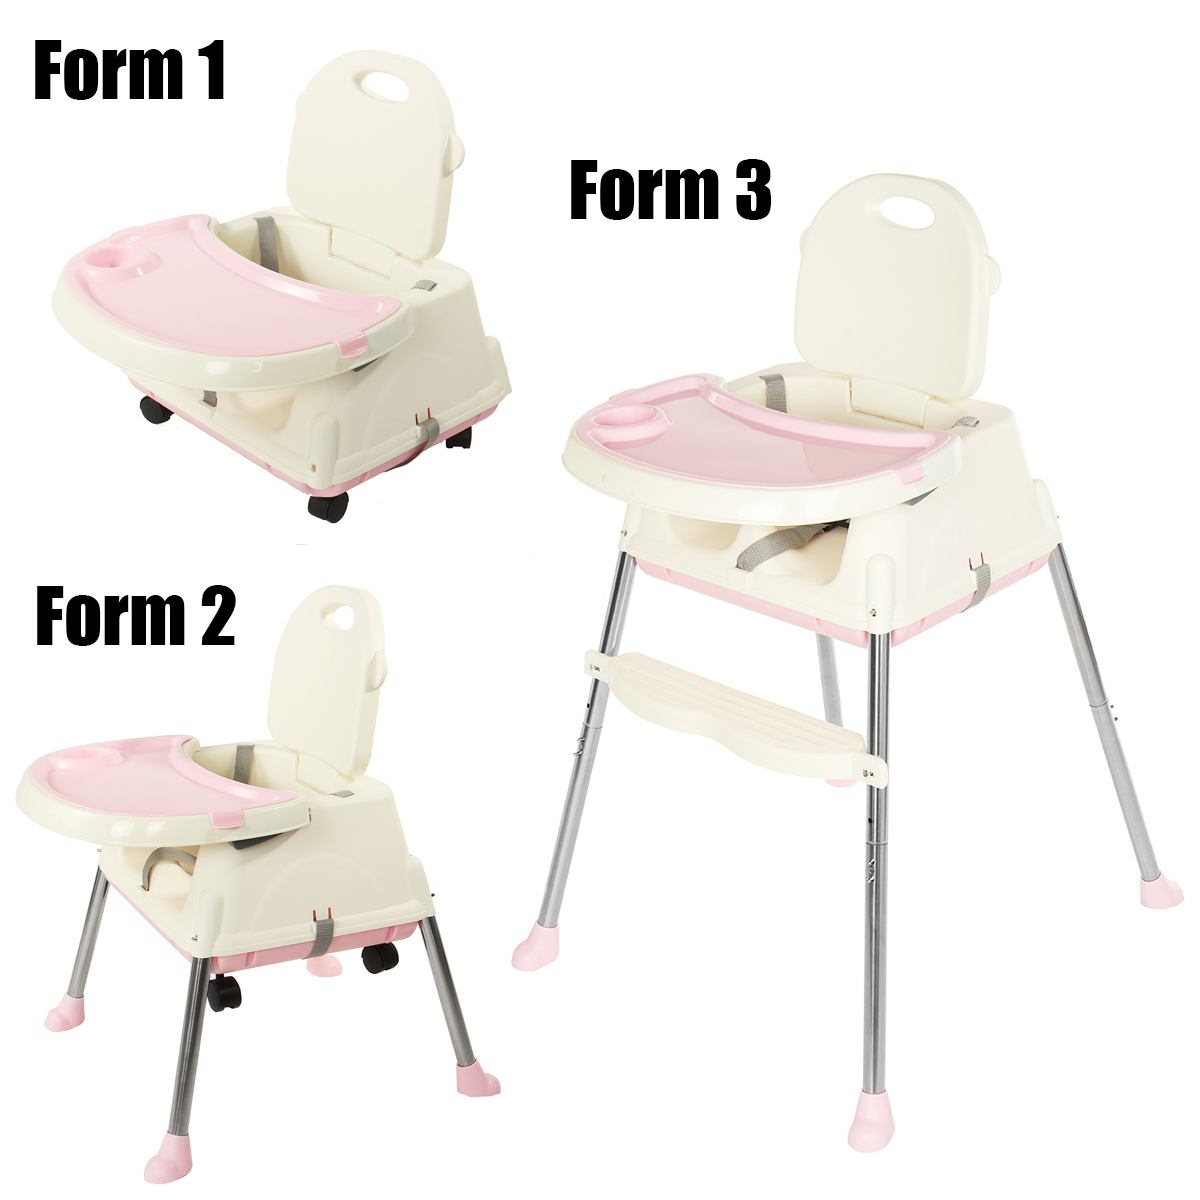 KUDOSALE-3-in-1-Adjustable-Baby-High-Chair-Table-Convertible-Play-Seat-Booster-Toddler-Feeding-with--1749429-7